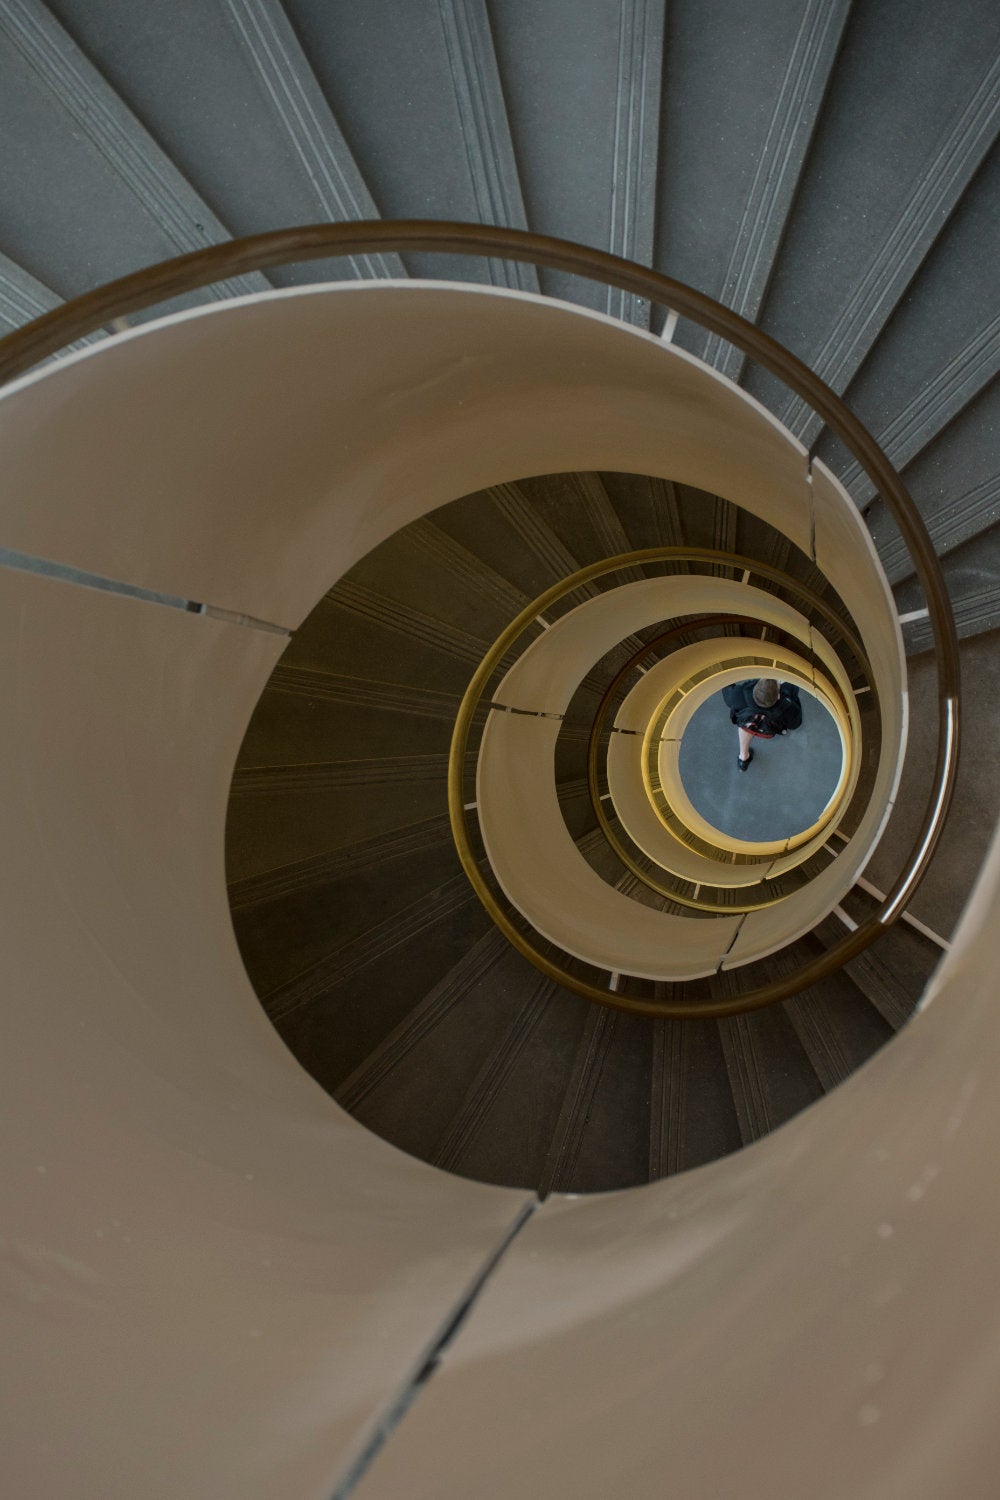 A view of a passerby walking beneath the center of the spiral staircase